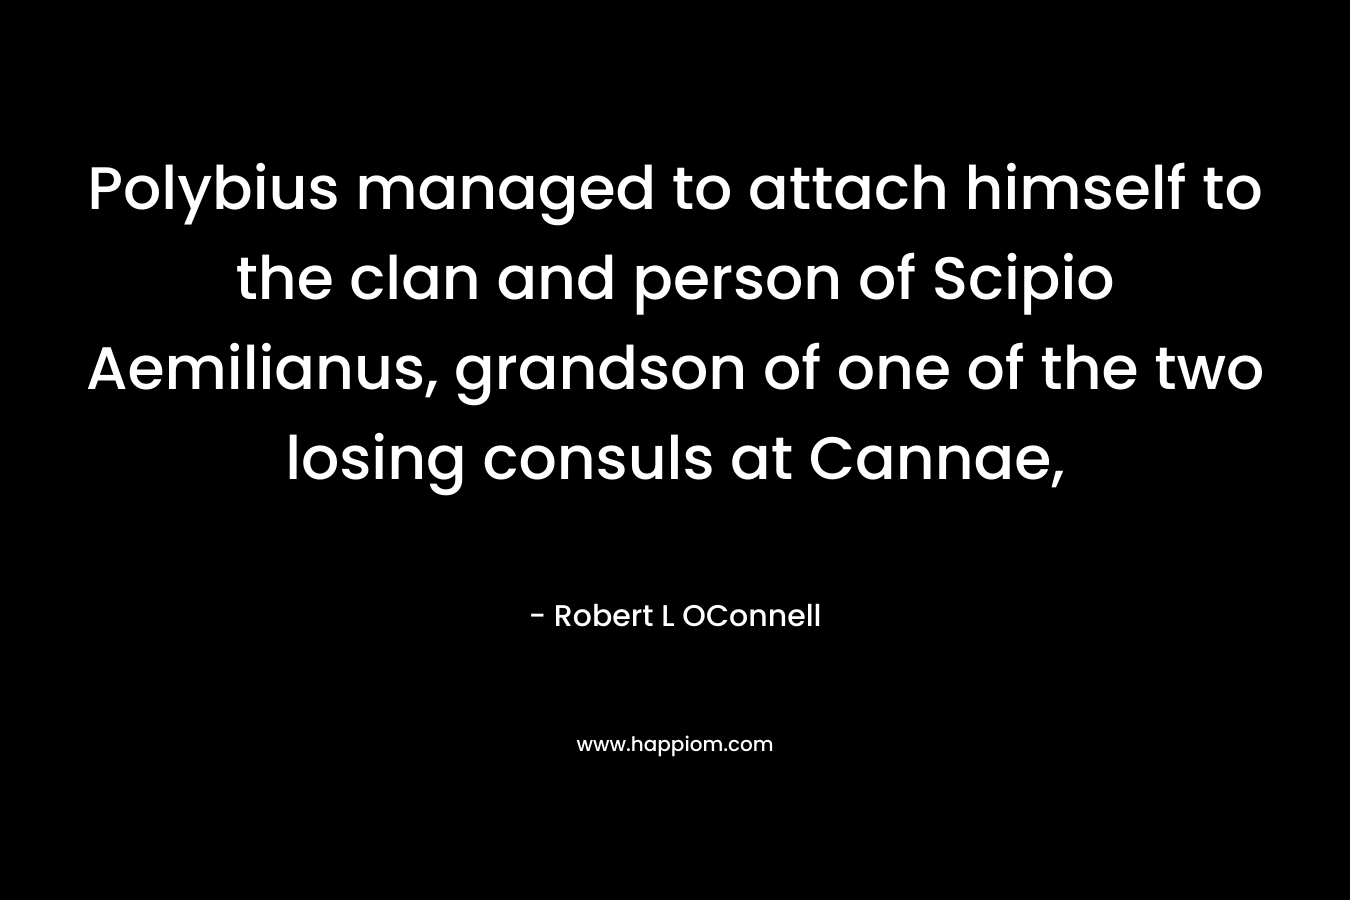 Polybius managed to attach himself to the clan and person of Scipio Aemilianus, grandson of one of the two losing consuls at Cannae,